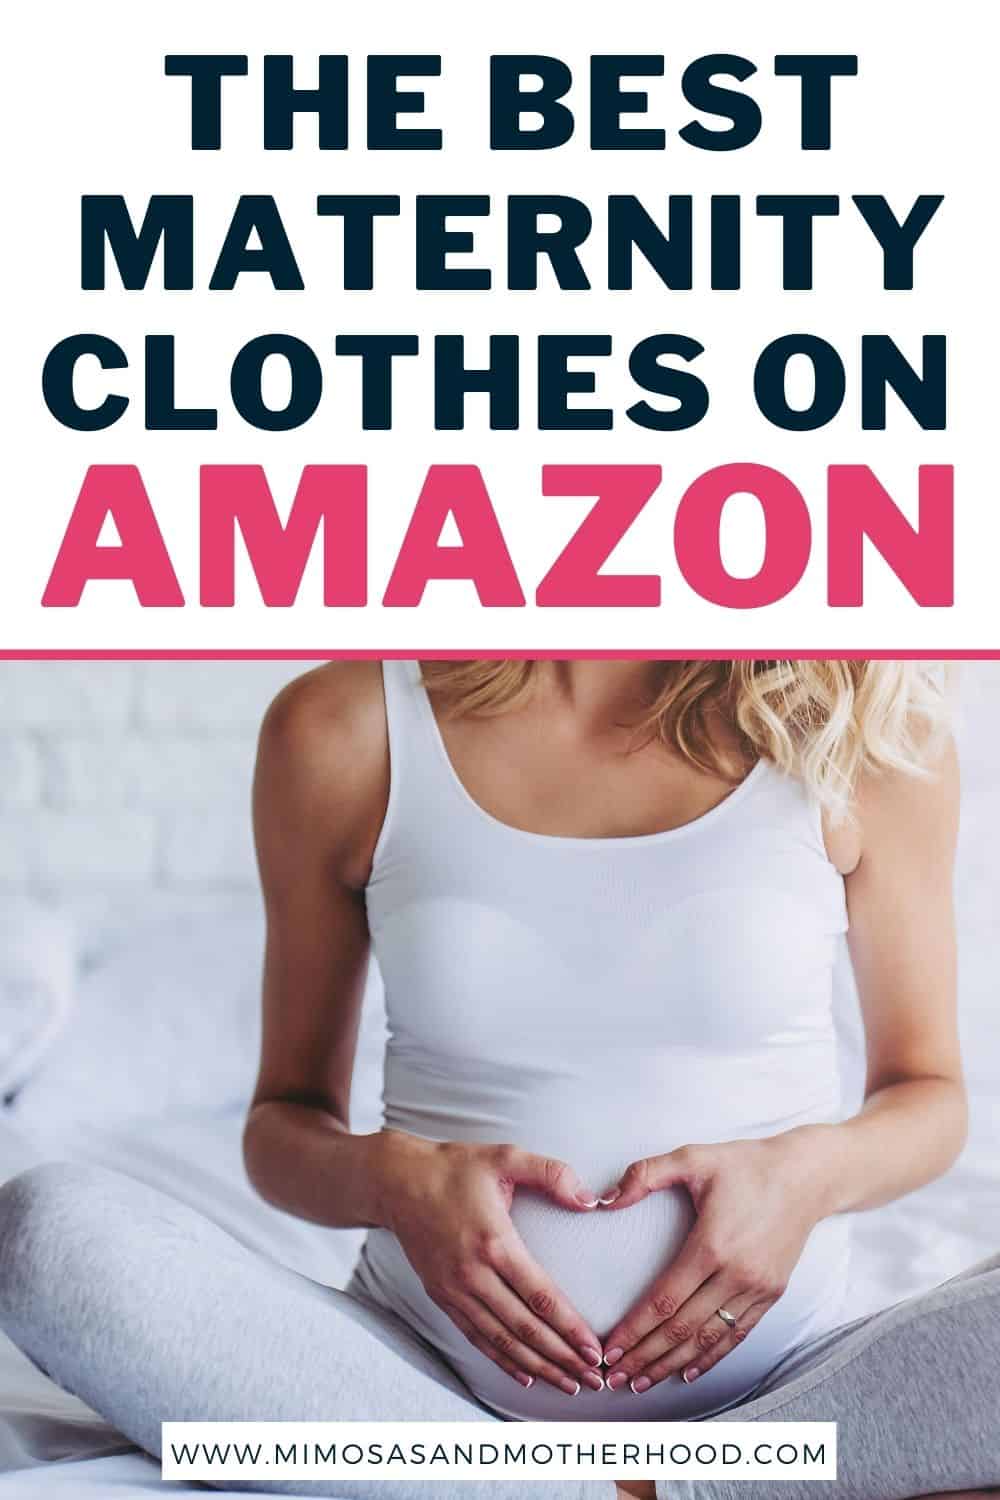 The Best Maternity Clothes on Amazon